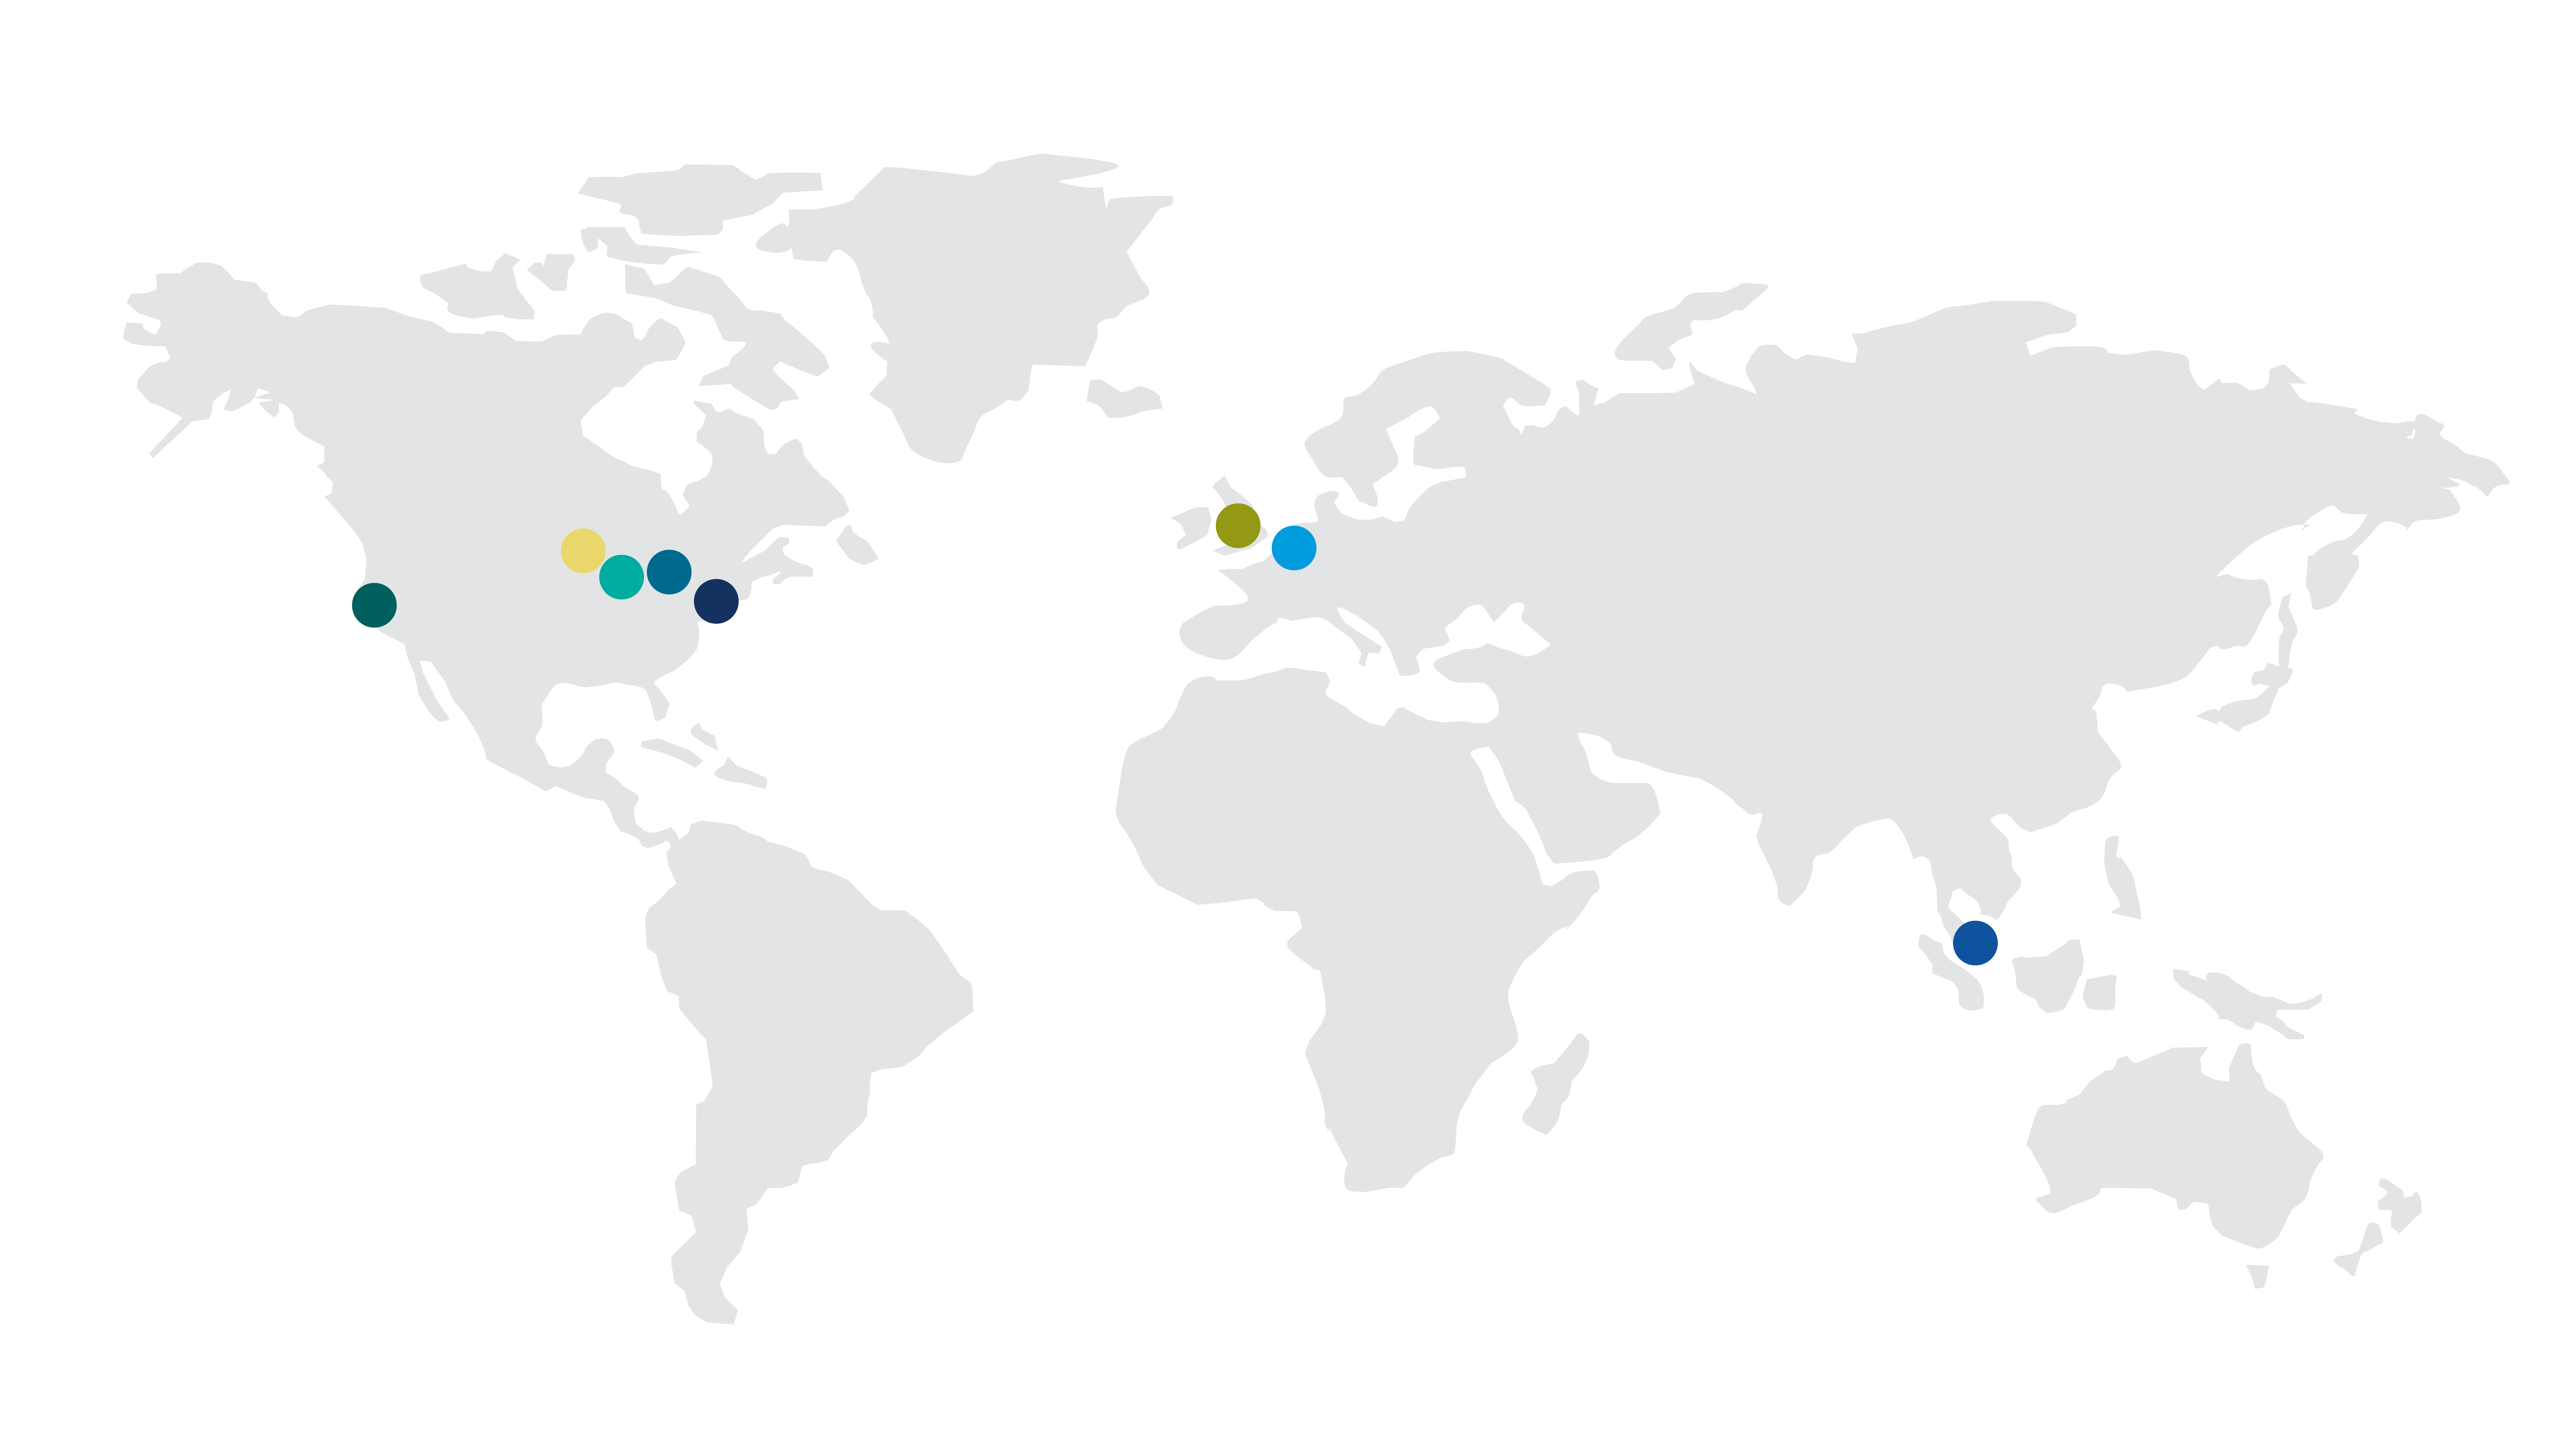 Map of world with locations highlighted